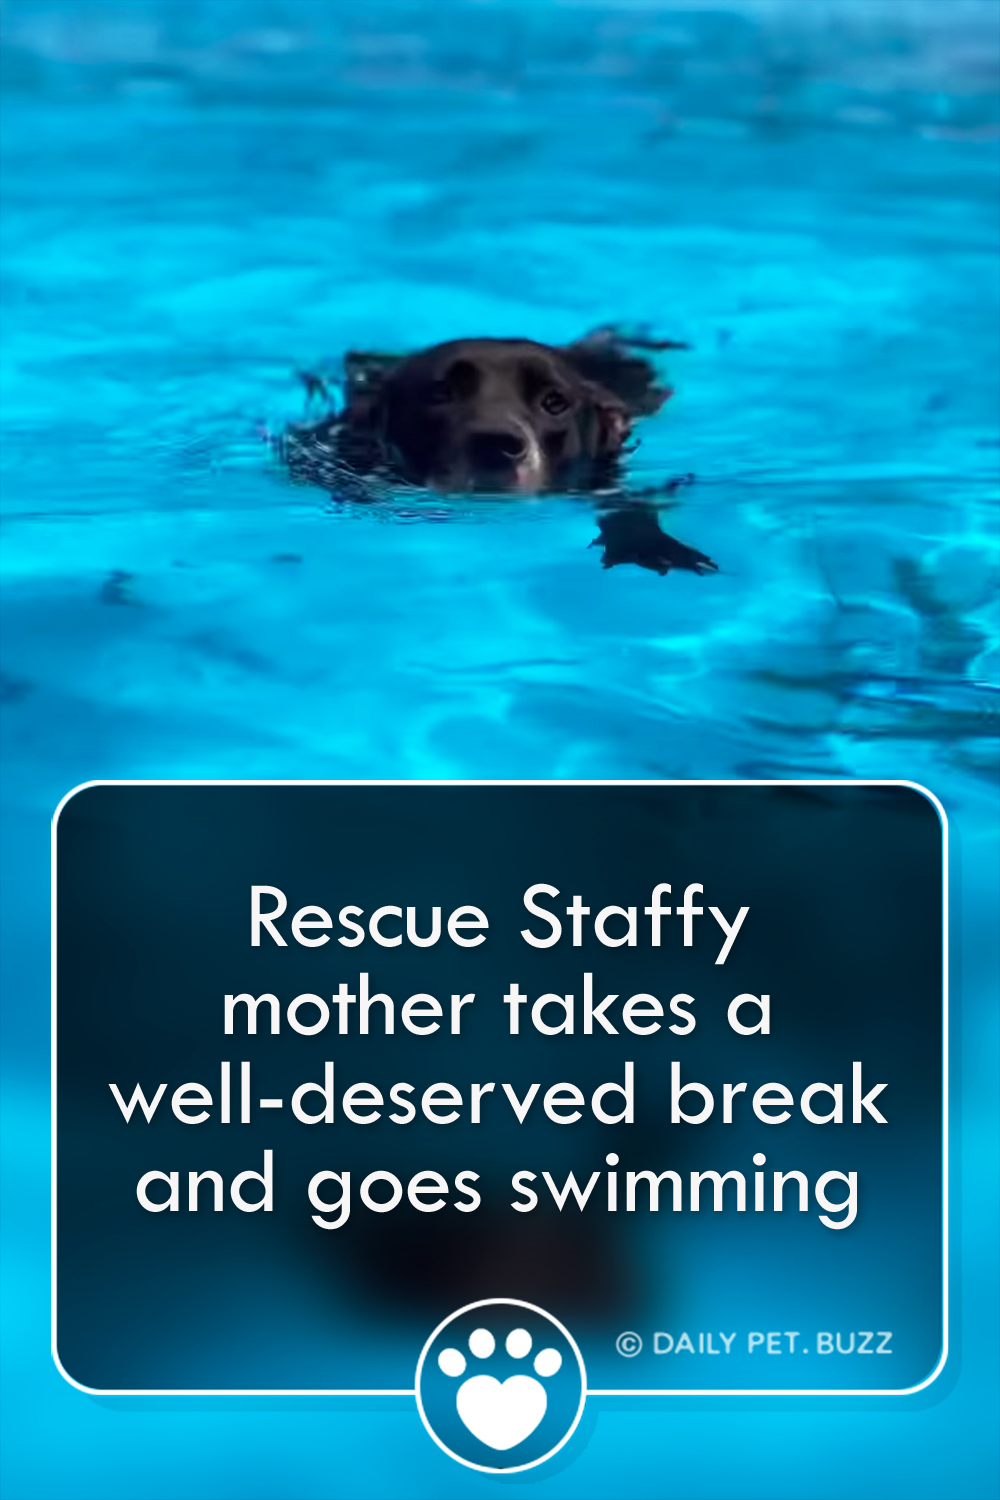 Rescue Staffy mother takes a well-deserved break and goes swimming